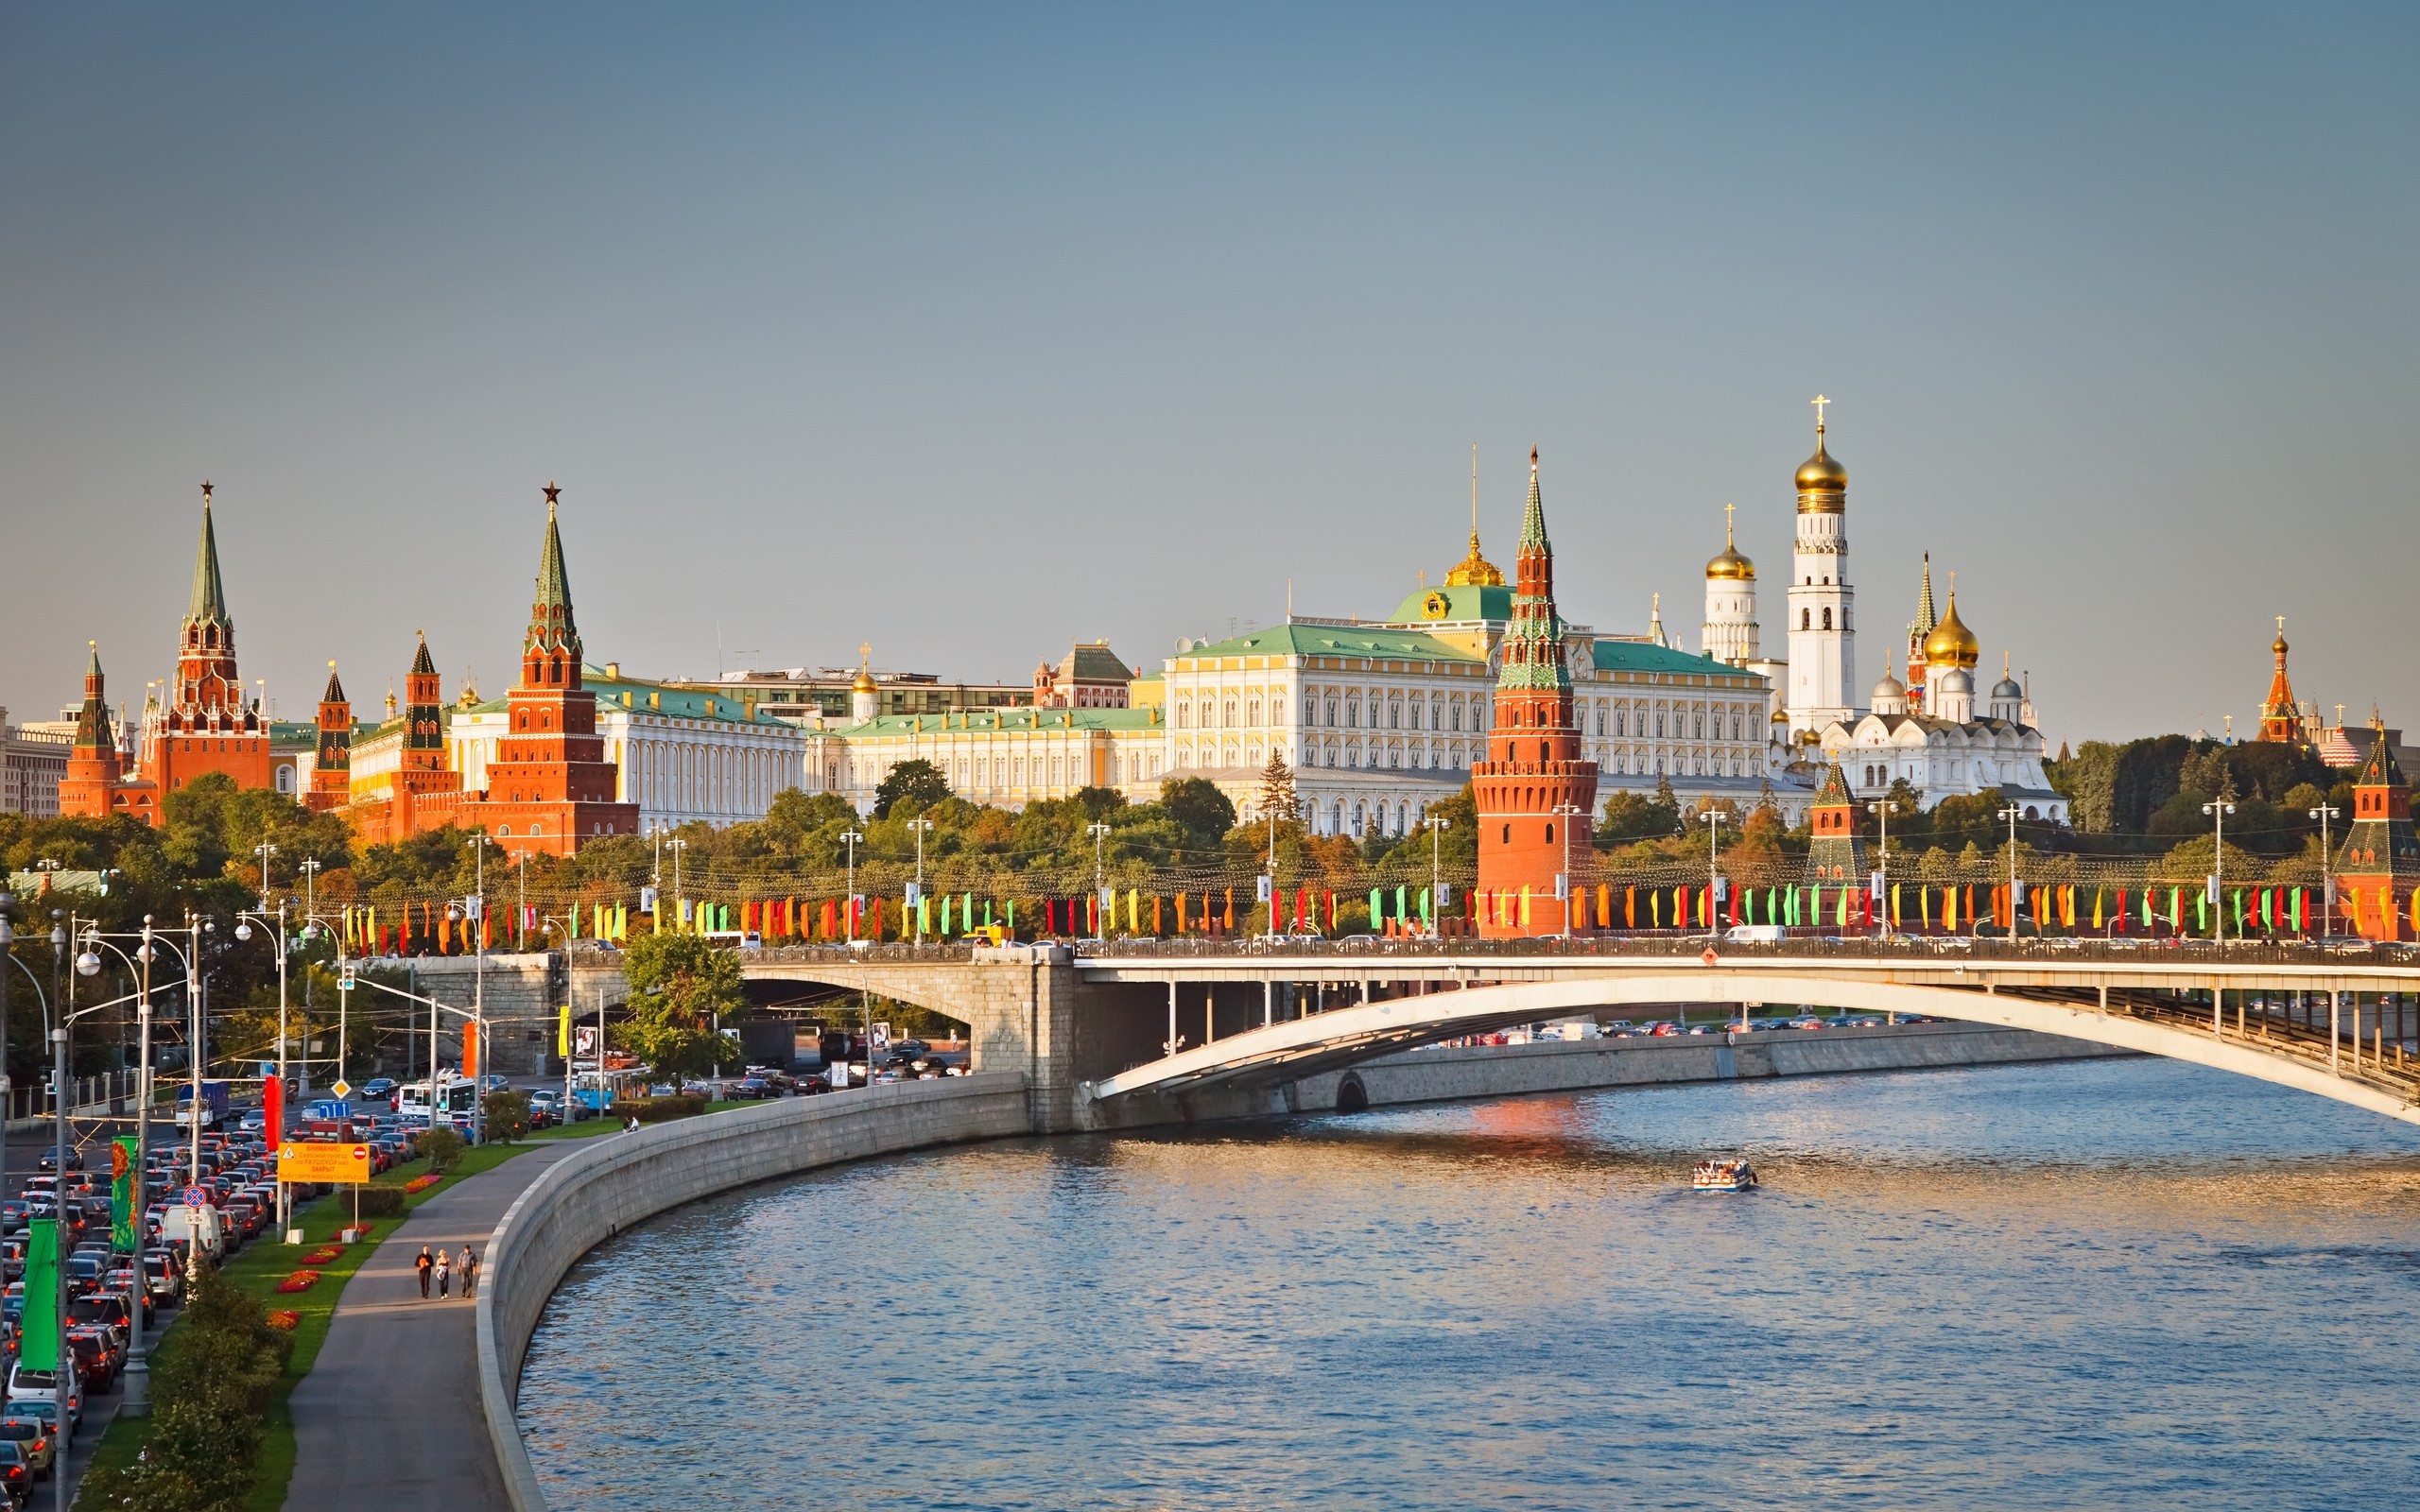 General 2560x1600 Russia Moscow cityscape car building Kremlin river boat trees plants summer